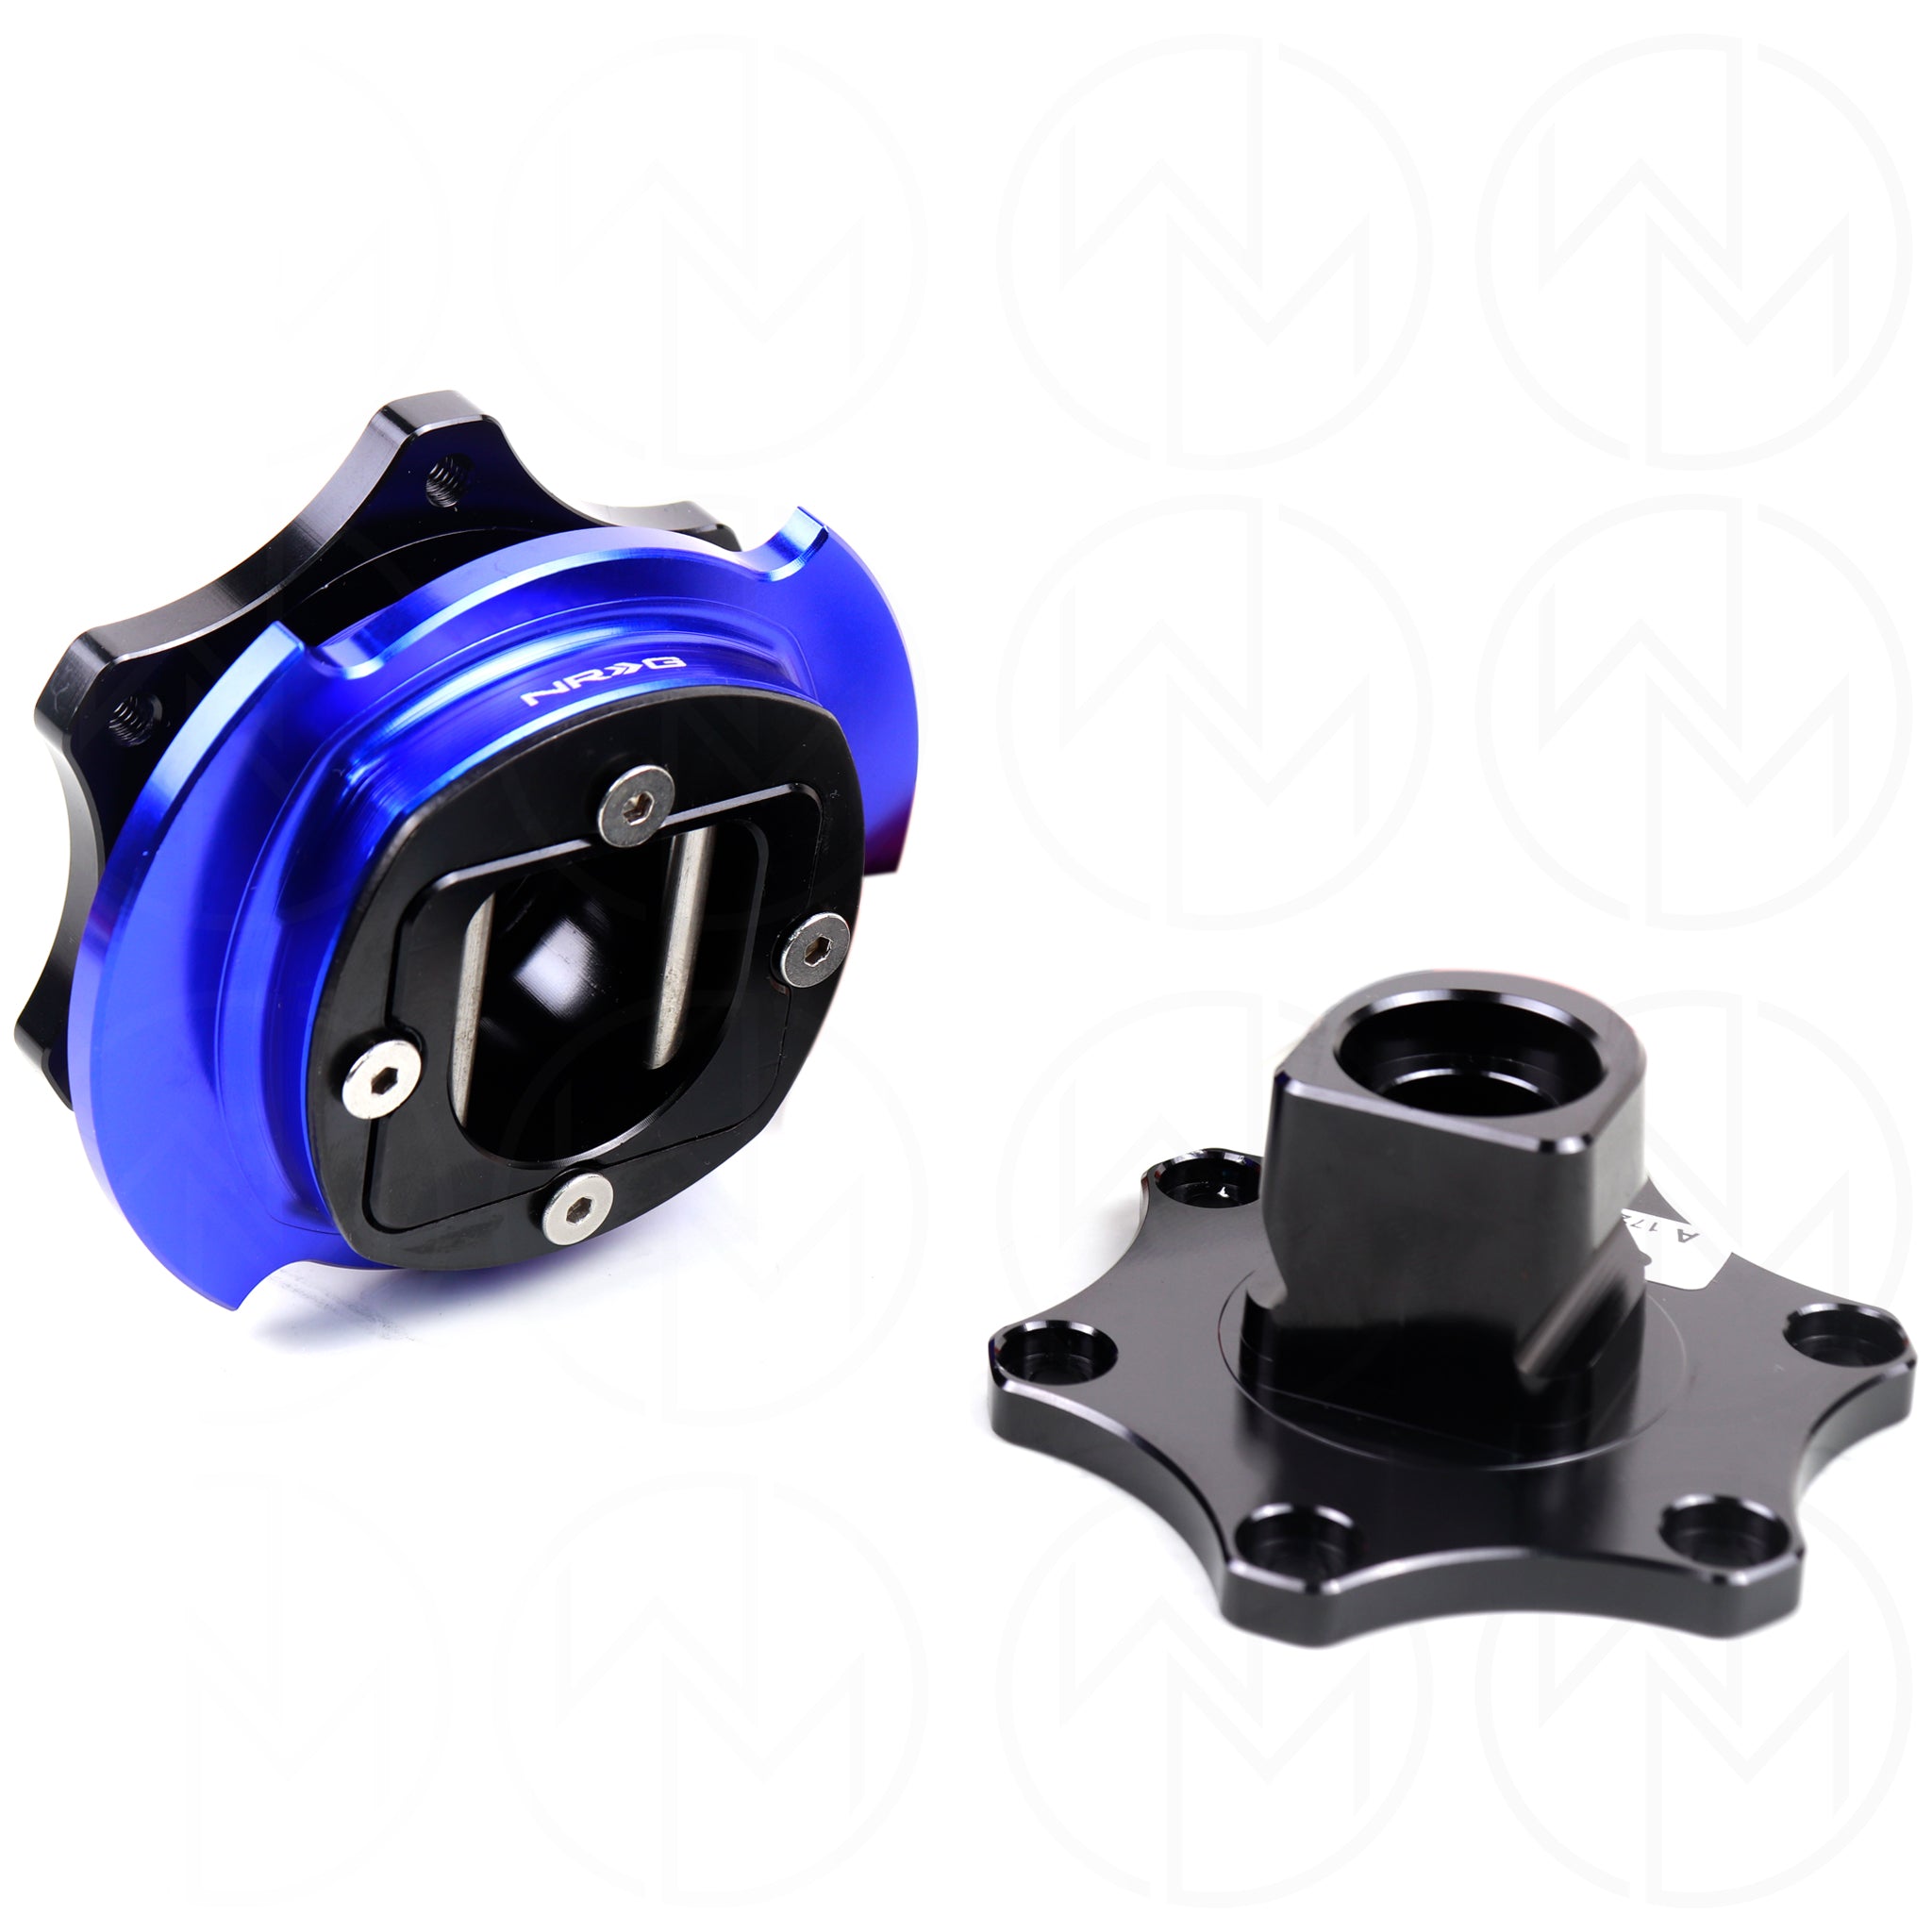 NRG Race Quick Release Adapter